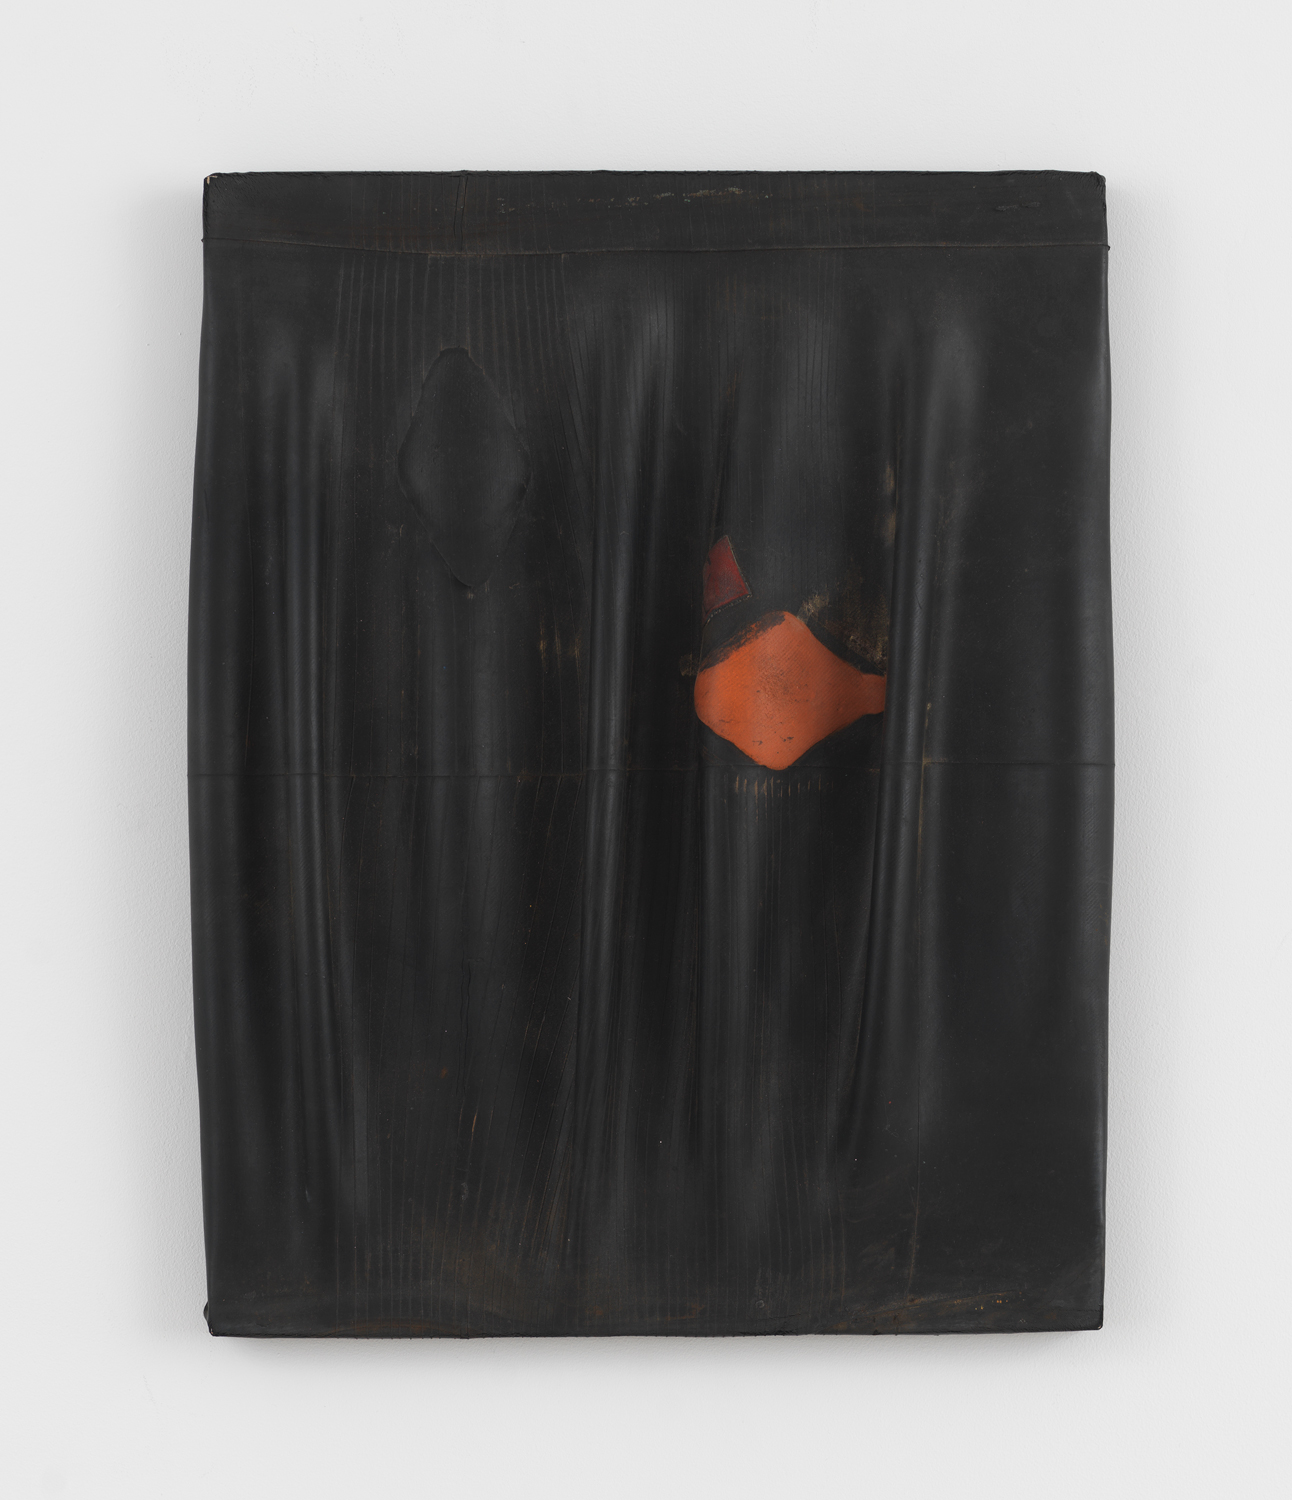 Dan Dowd, Untitled, 2013, Found patched truck tire innertube rubber on found board, 17 x 13 x 2 in.